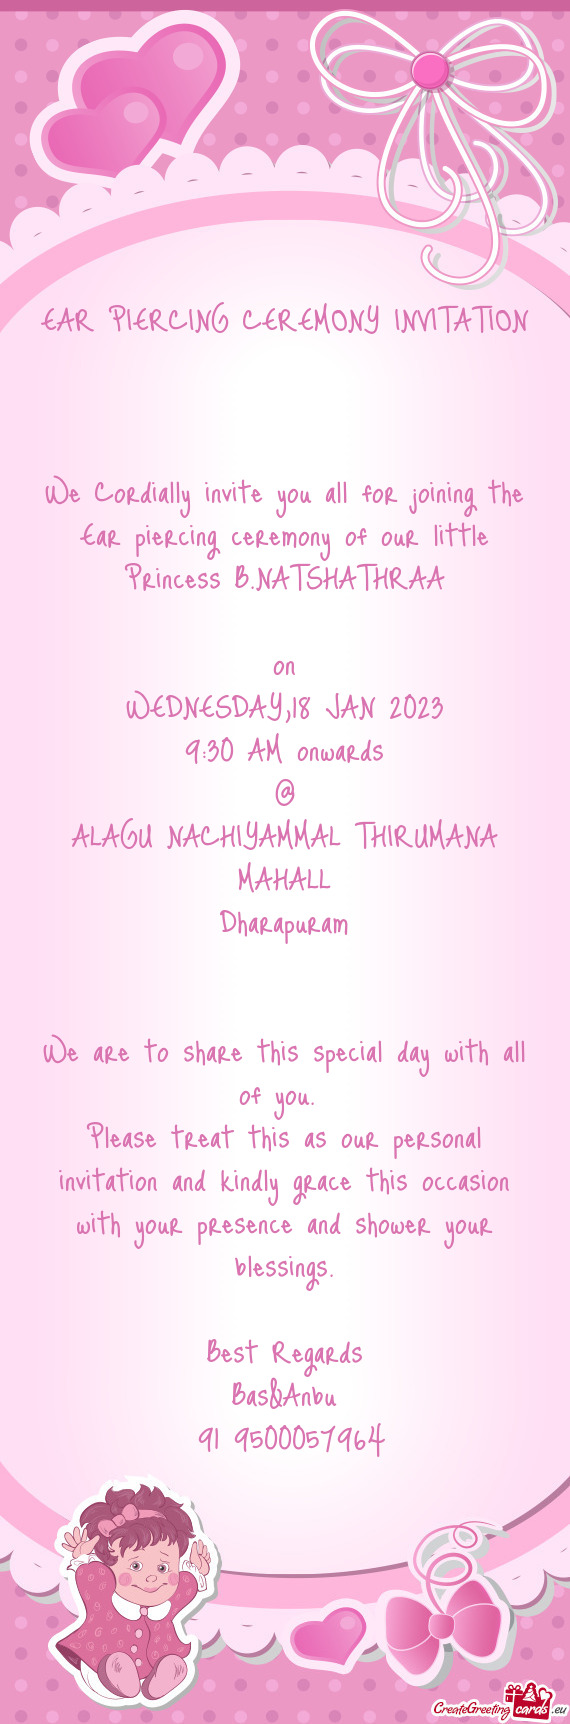 We Cordially invite you all for joining the Ear piercing ceremony of our little Princess B.NATSHATHR